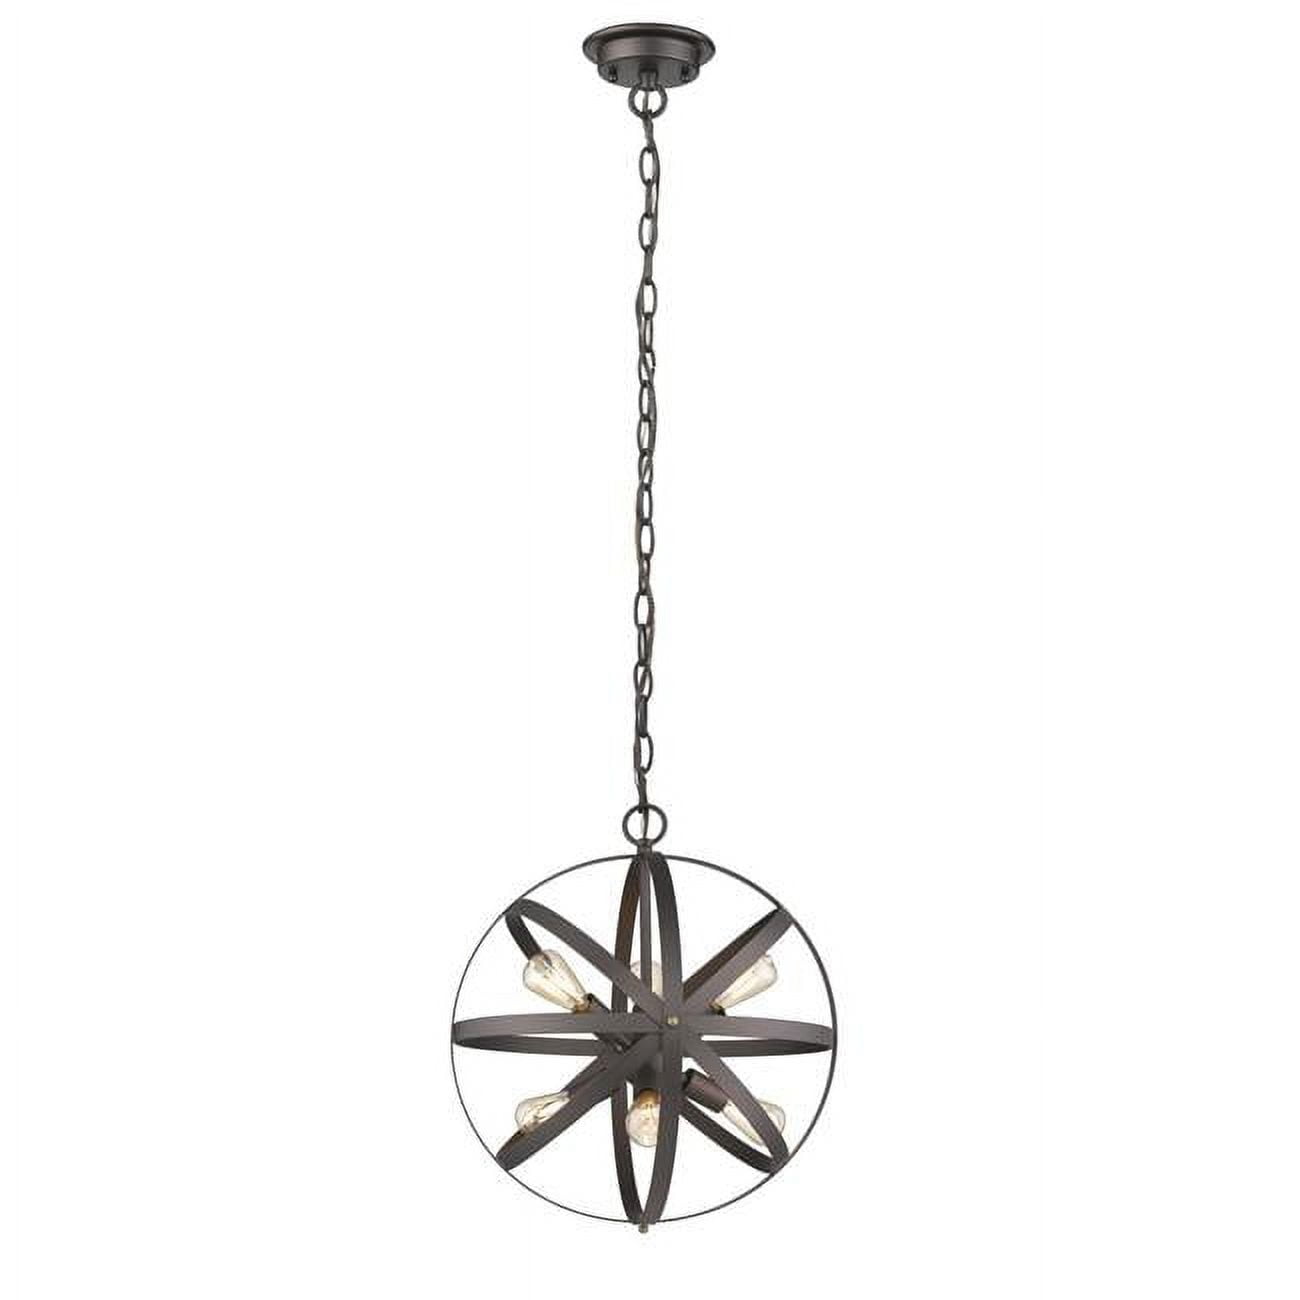 Ch2d083rb17-dp6 Ironclad Industrial-style 6 Light Rubbed Bronze Ceiling Pendant - 17 In.